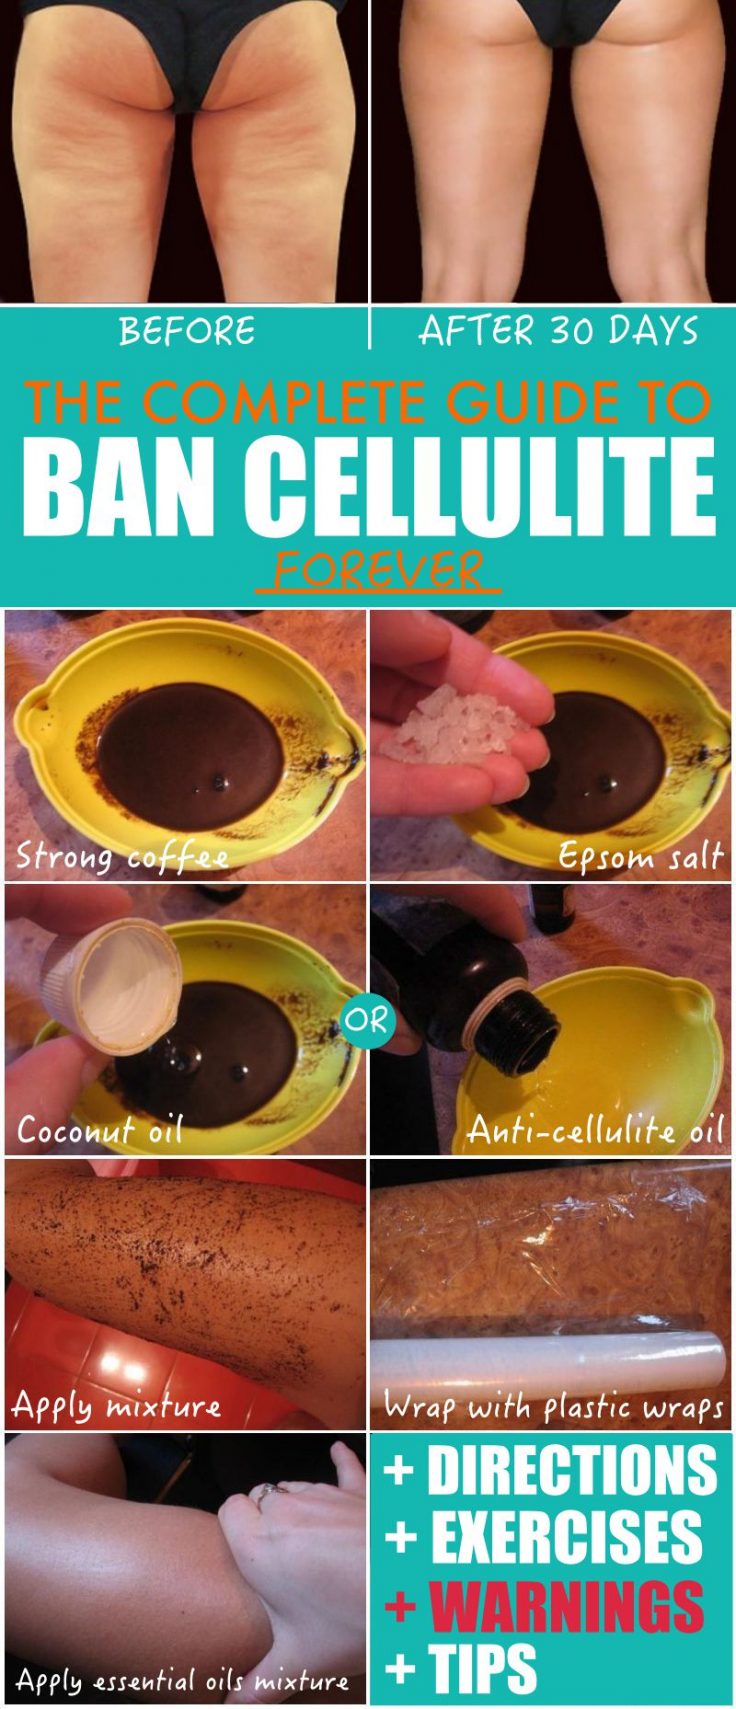 How To Ban Cellulite